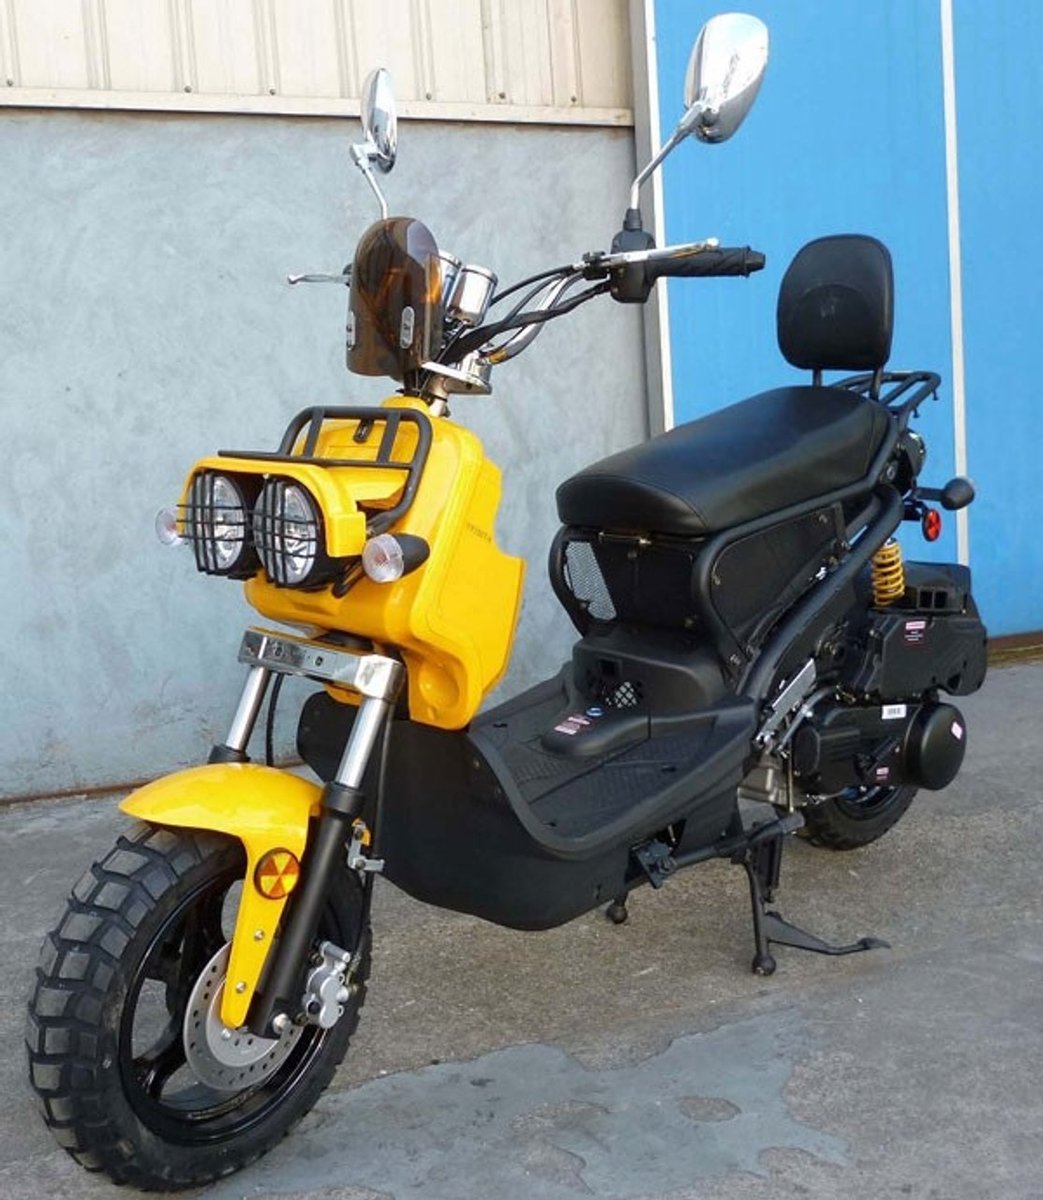 Roketa MC-22Y 150 Scooter, 4-Stroke, Single Cylinder, Air Cooled, Eletric /kick Start
$1,414.50
Buy Now 

txpowersports.com/roketa-mc-22y-…

#Roketa #SingleCylinder #4Stroke #150cc #Scooter